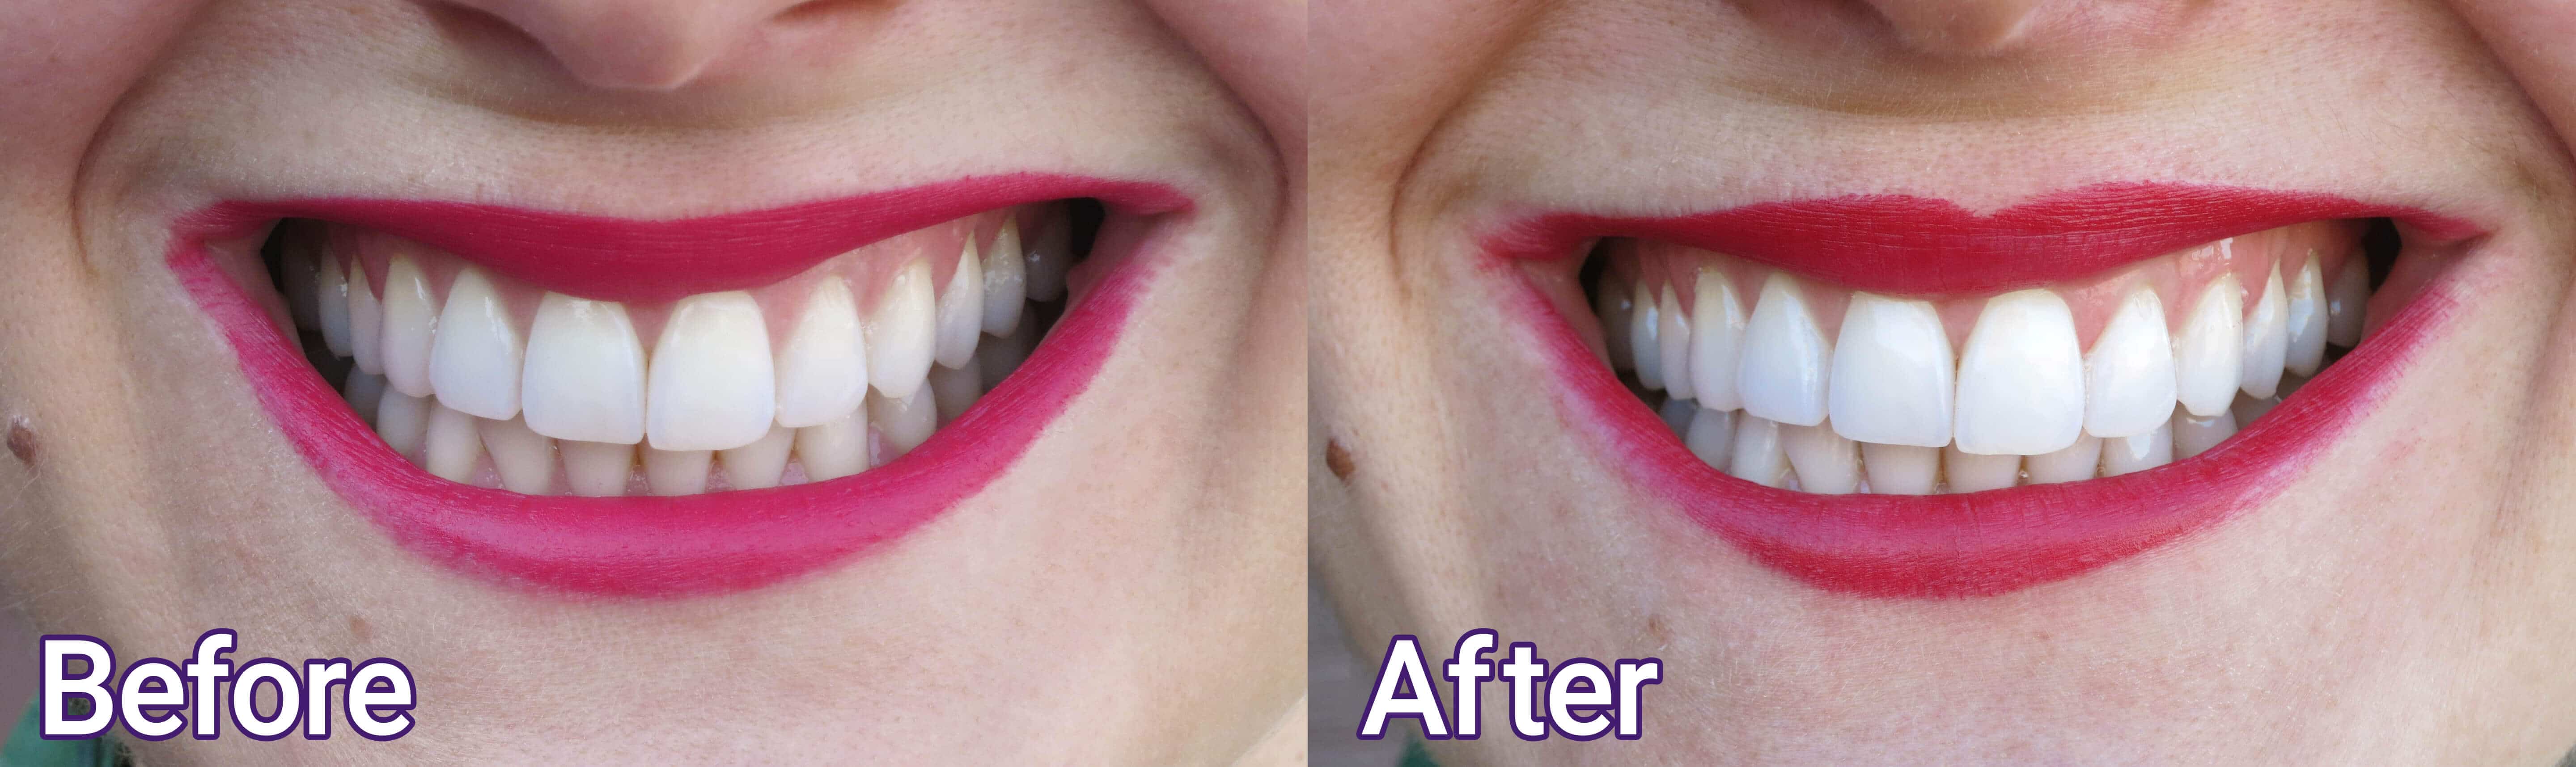 Smile Brilliant Teeth Whitening Before and After by Modnitsa Styling